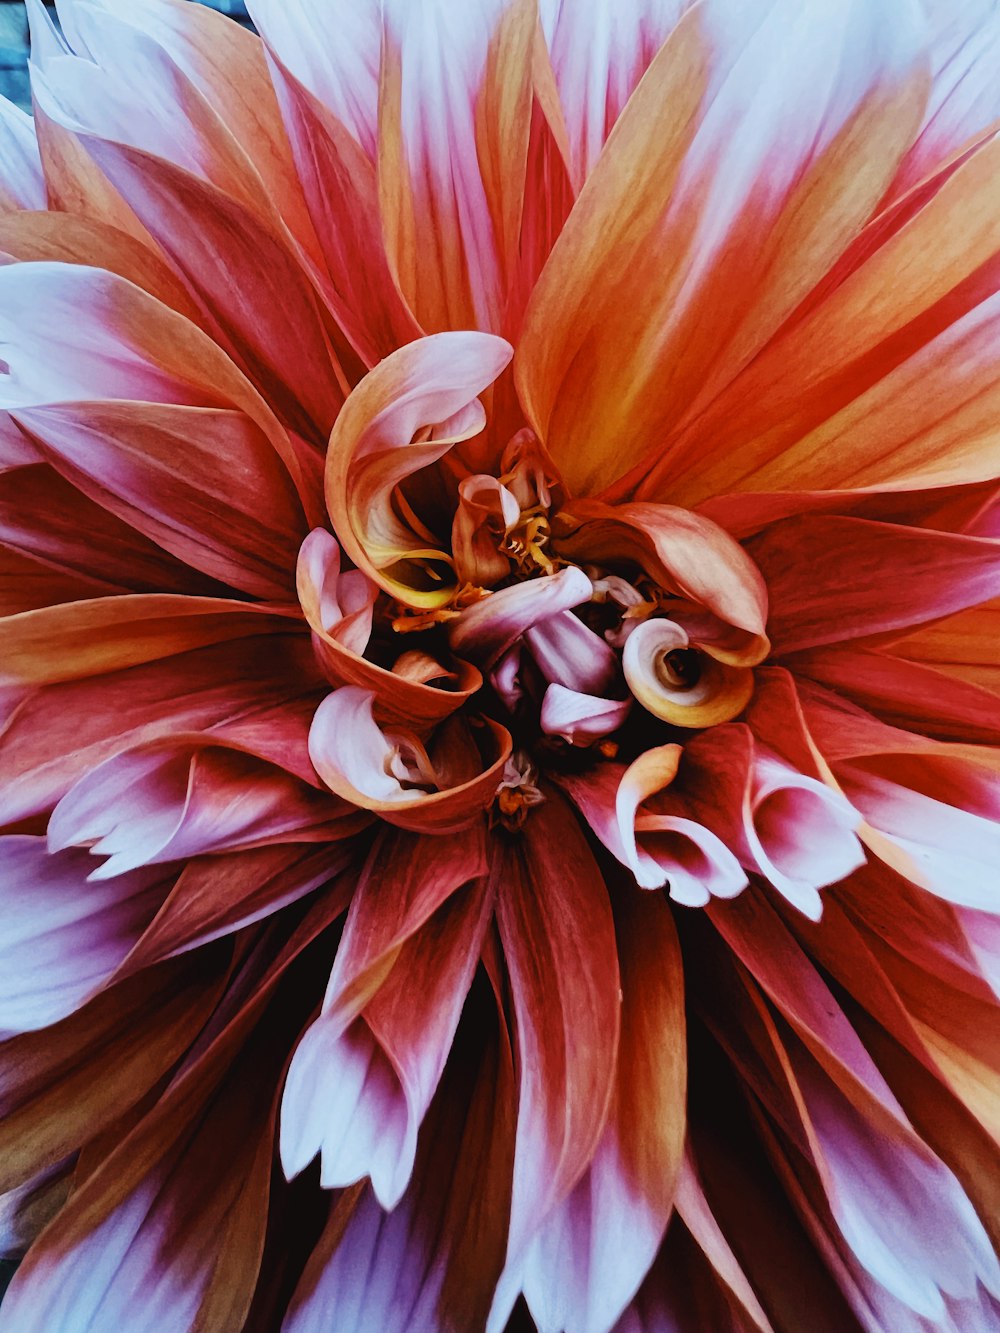 a close up of a large flower with many petals